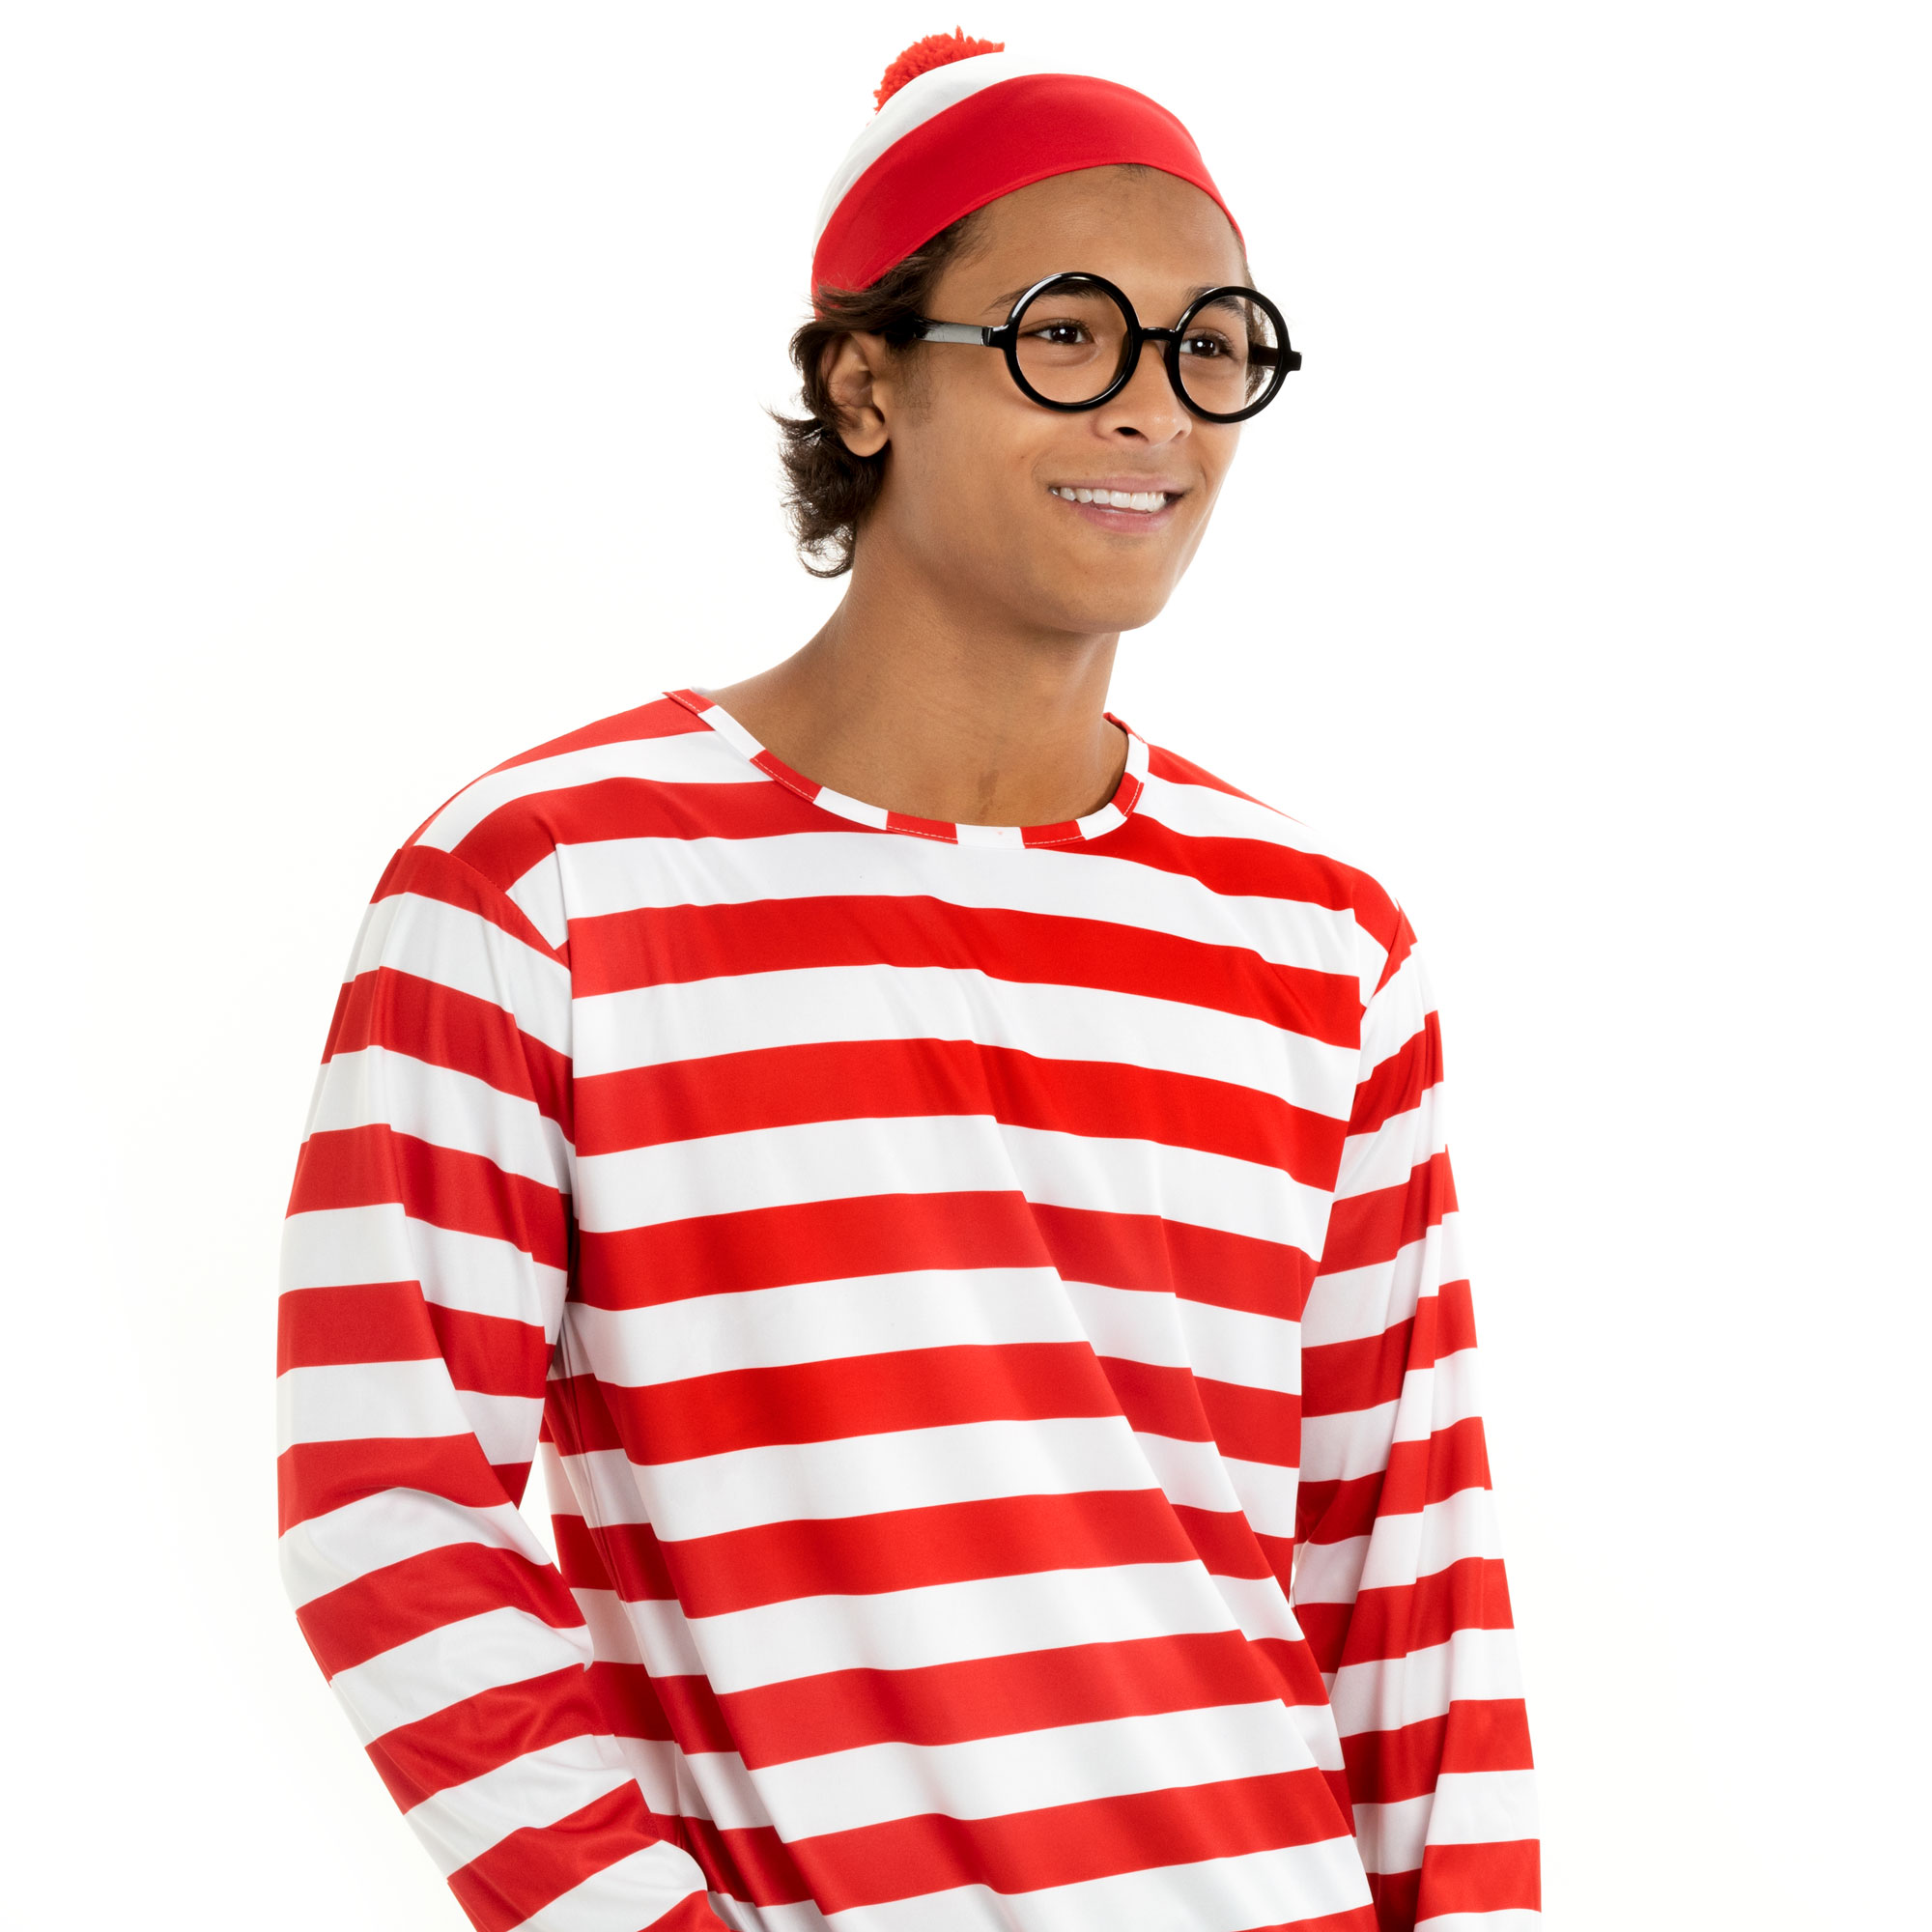 Where's Wally Halloween Costume - Men's Cosplay Outfit, S